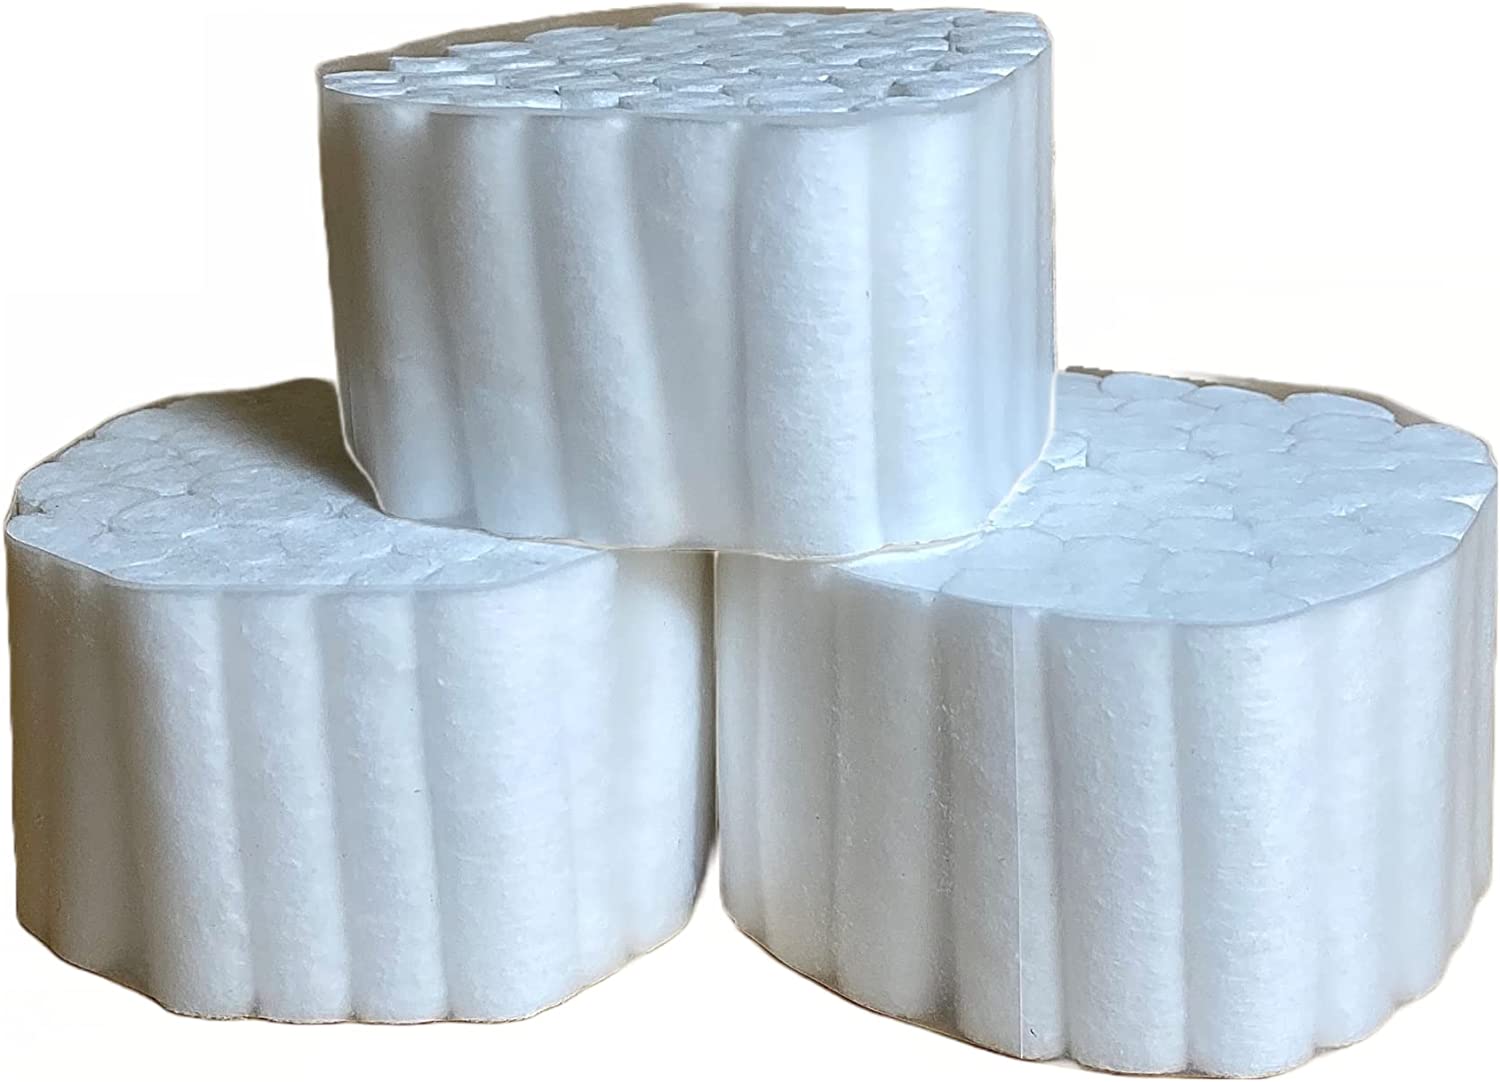 Cotton Rolls by Essentials Healthcare Products; 2,500 Count, #2 Medium, Non-Sterile. 1 1/2" x 3/8"